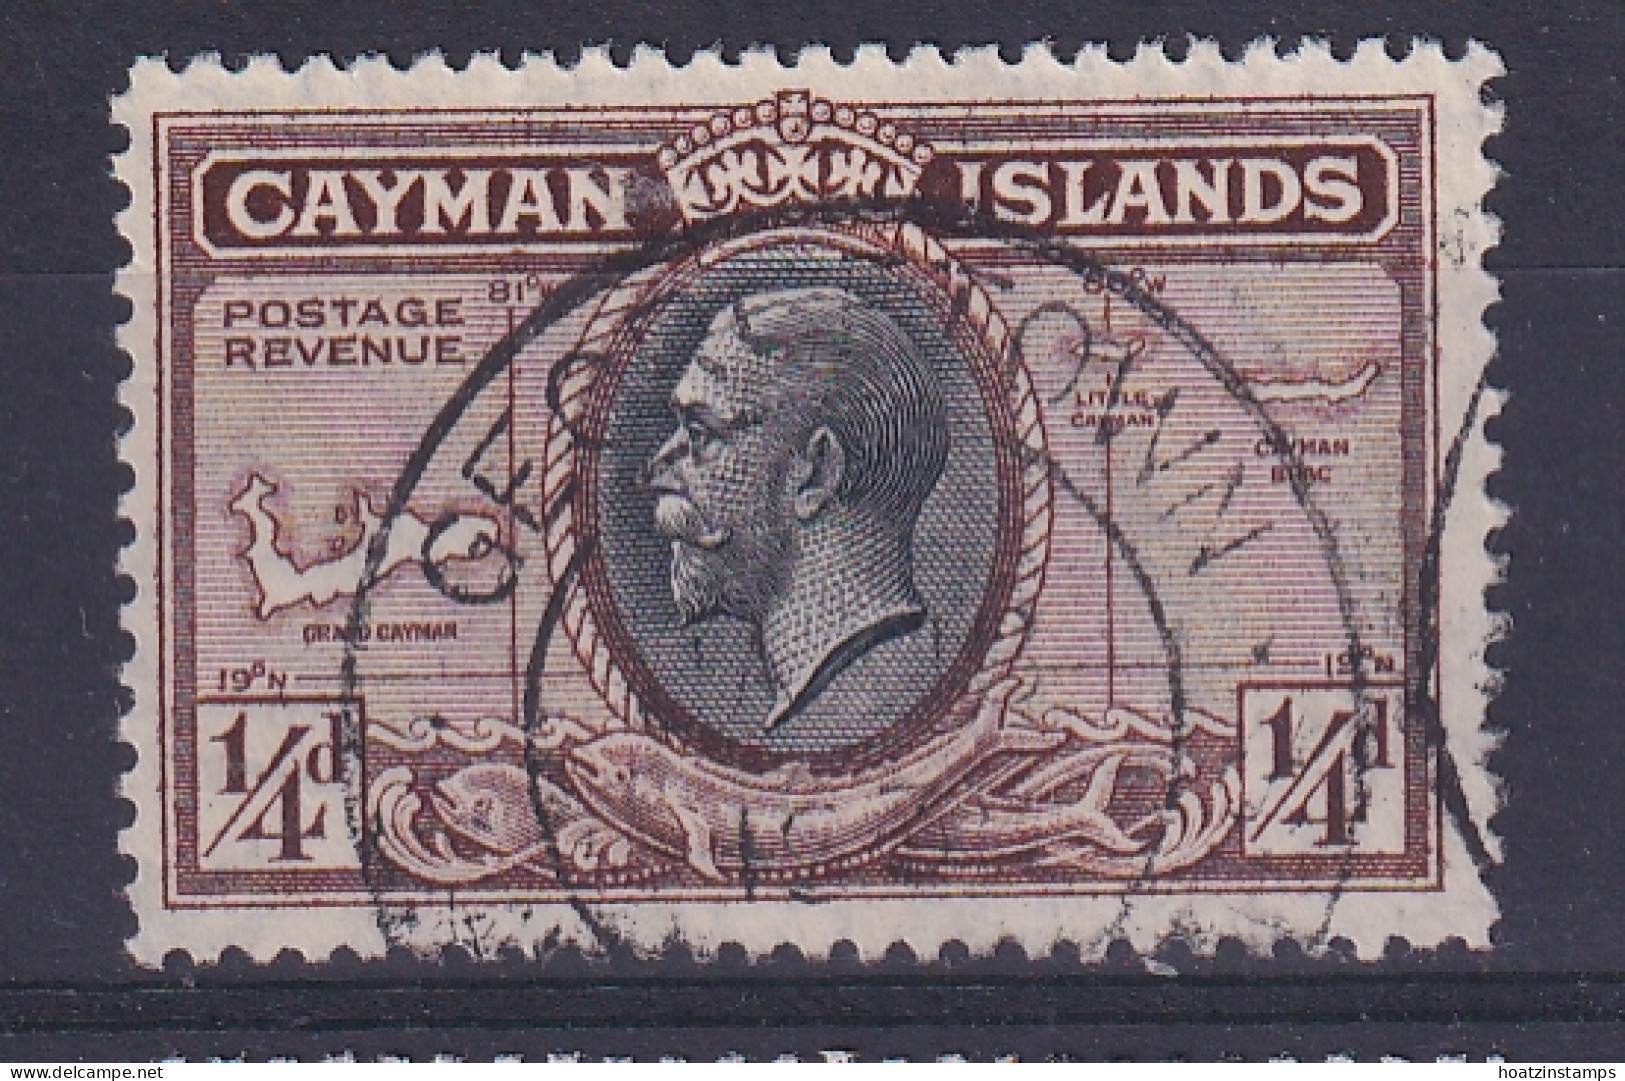 Cayman Islands: 1935   KGV - Pictorial   SG96   ¼d     Used - Cayman Islands